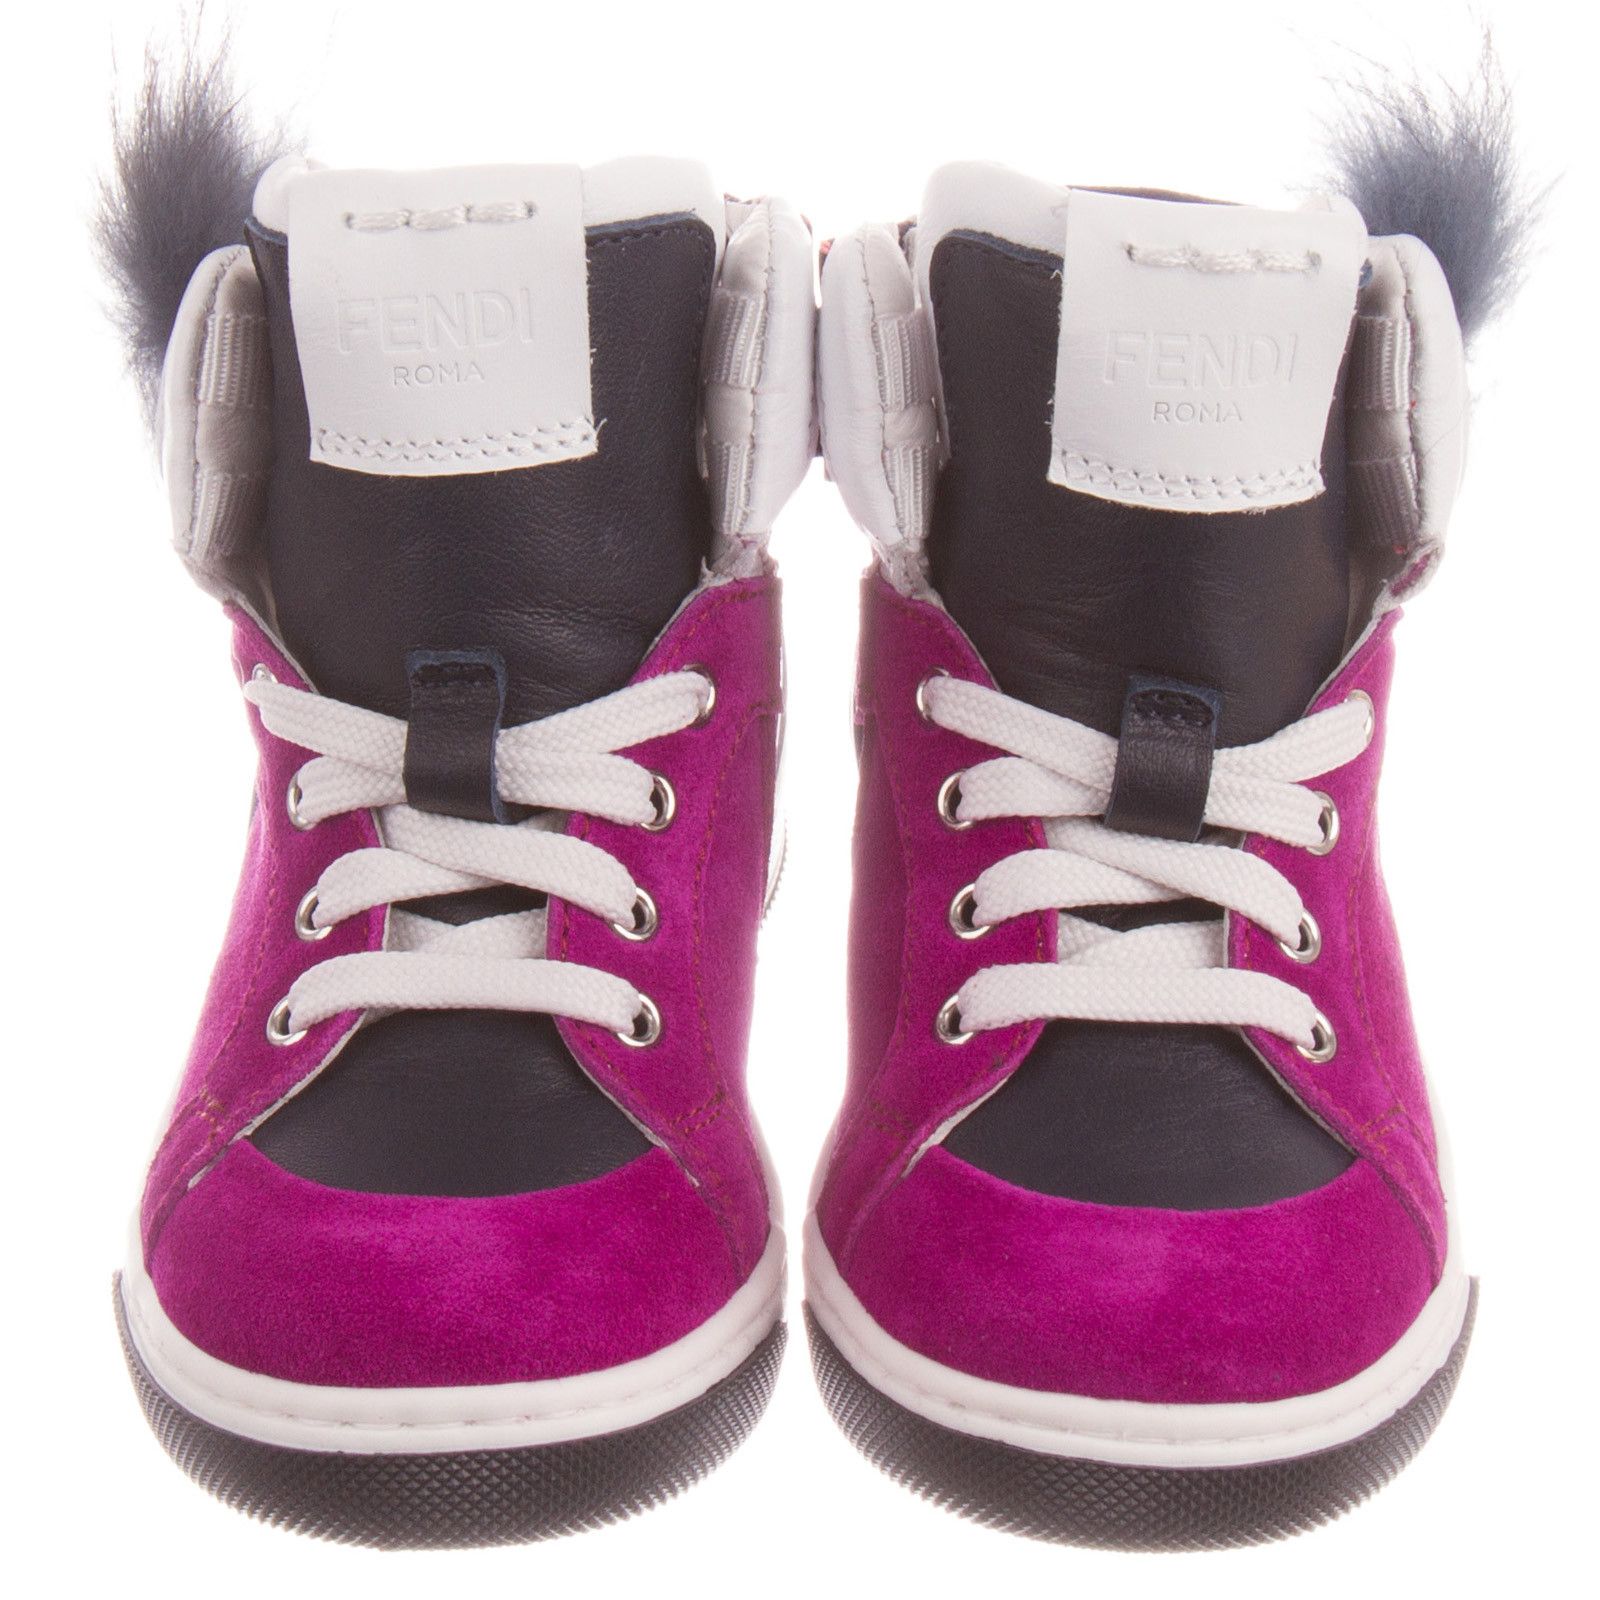 Boys&Girls Purple Suede High-top Trainers With Fur - CÉMAROSE | Children's Fashion Store - 2